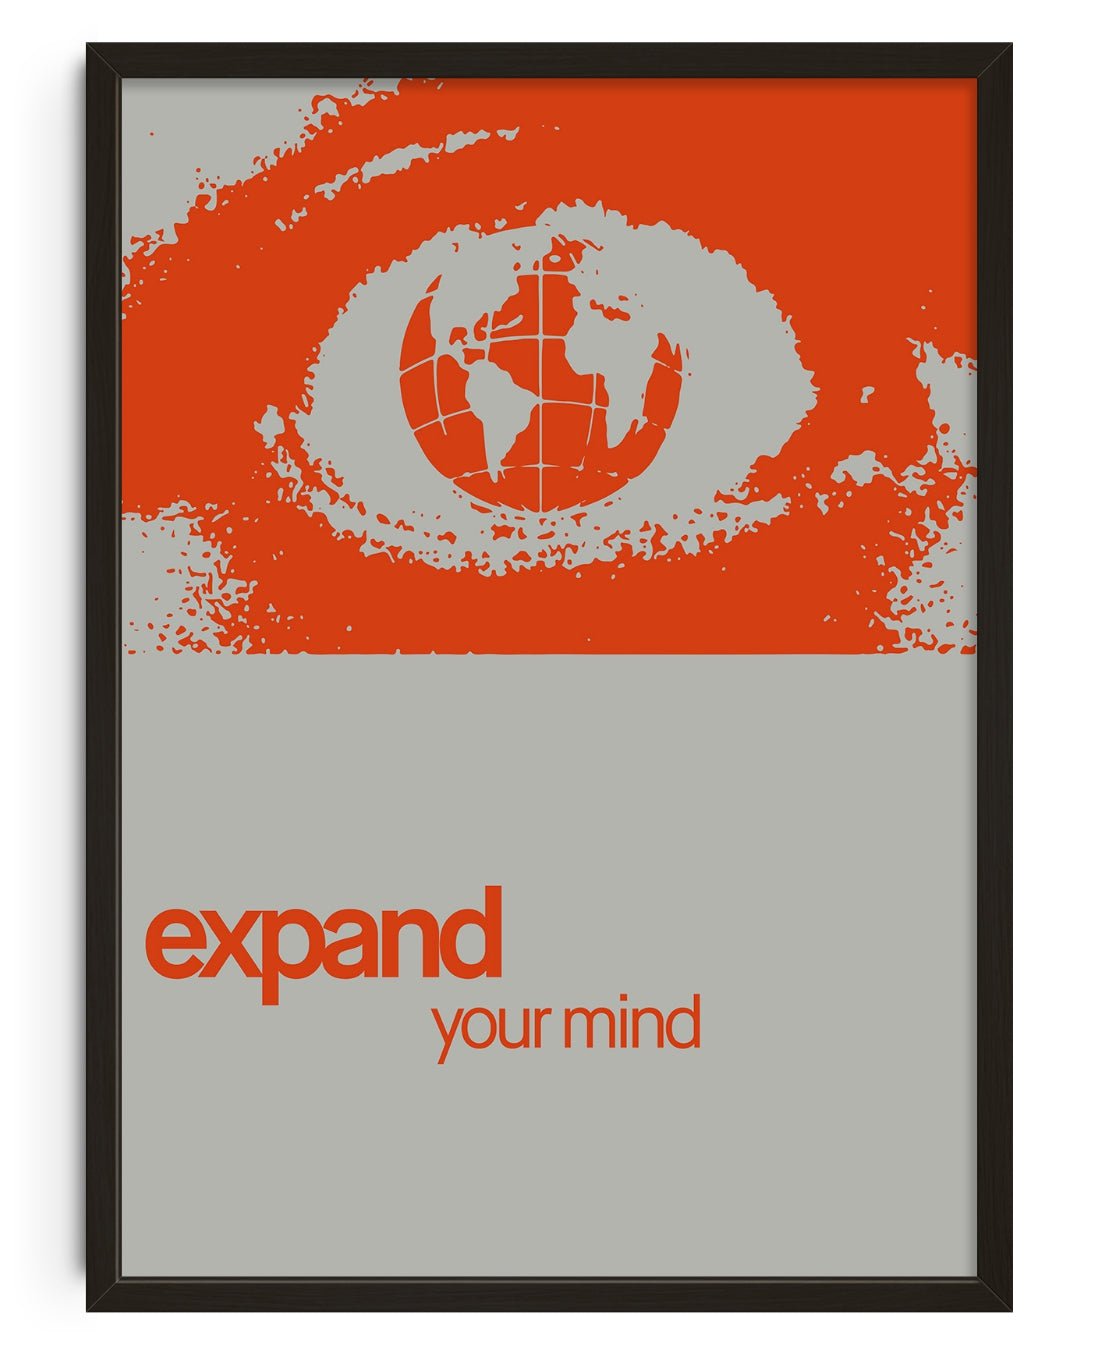 11.7x16.5" (A3) Expand your mind - UNFRAMED contemporary wall art print by Adam Foster - sold by DROOL